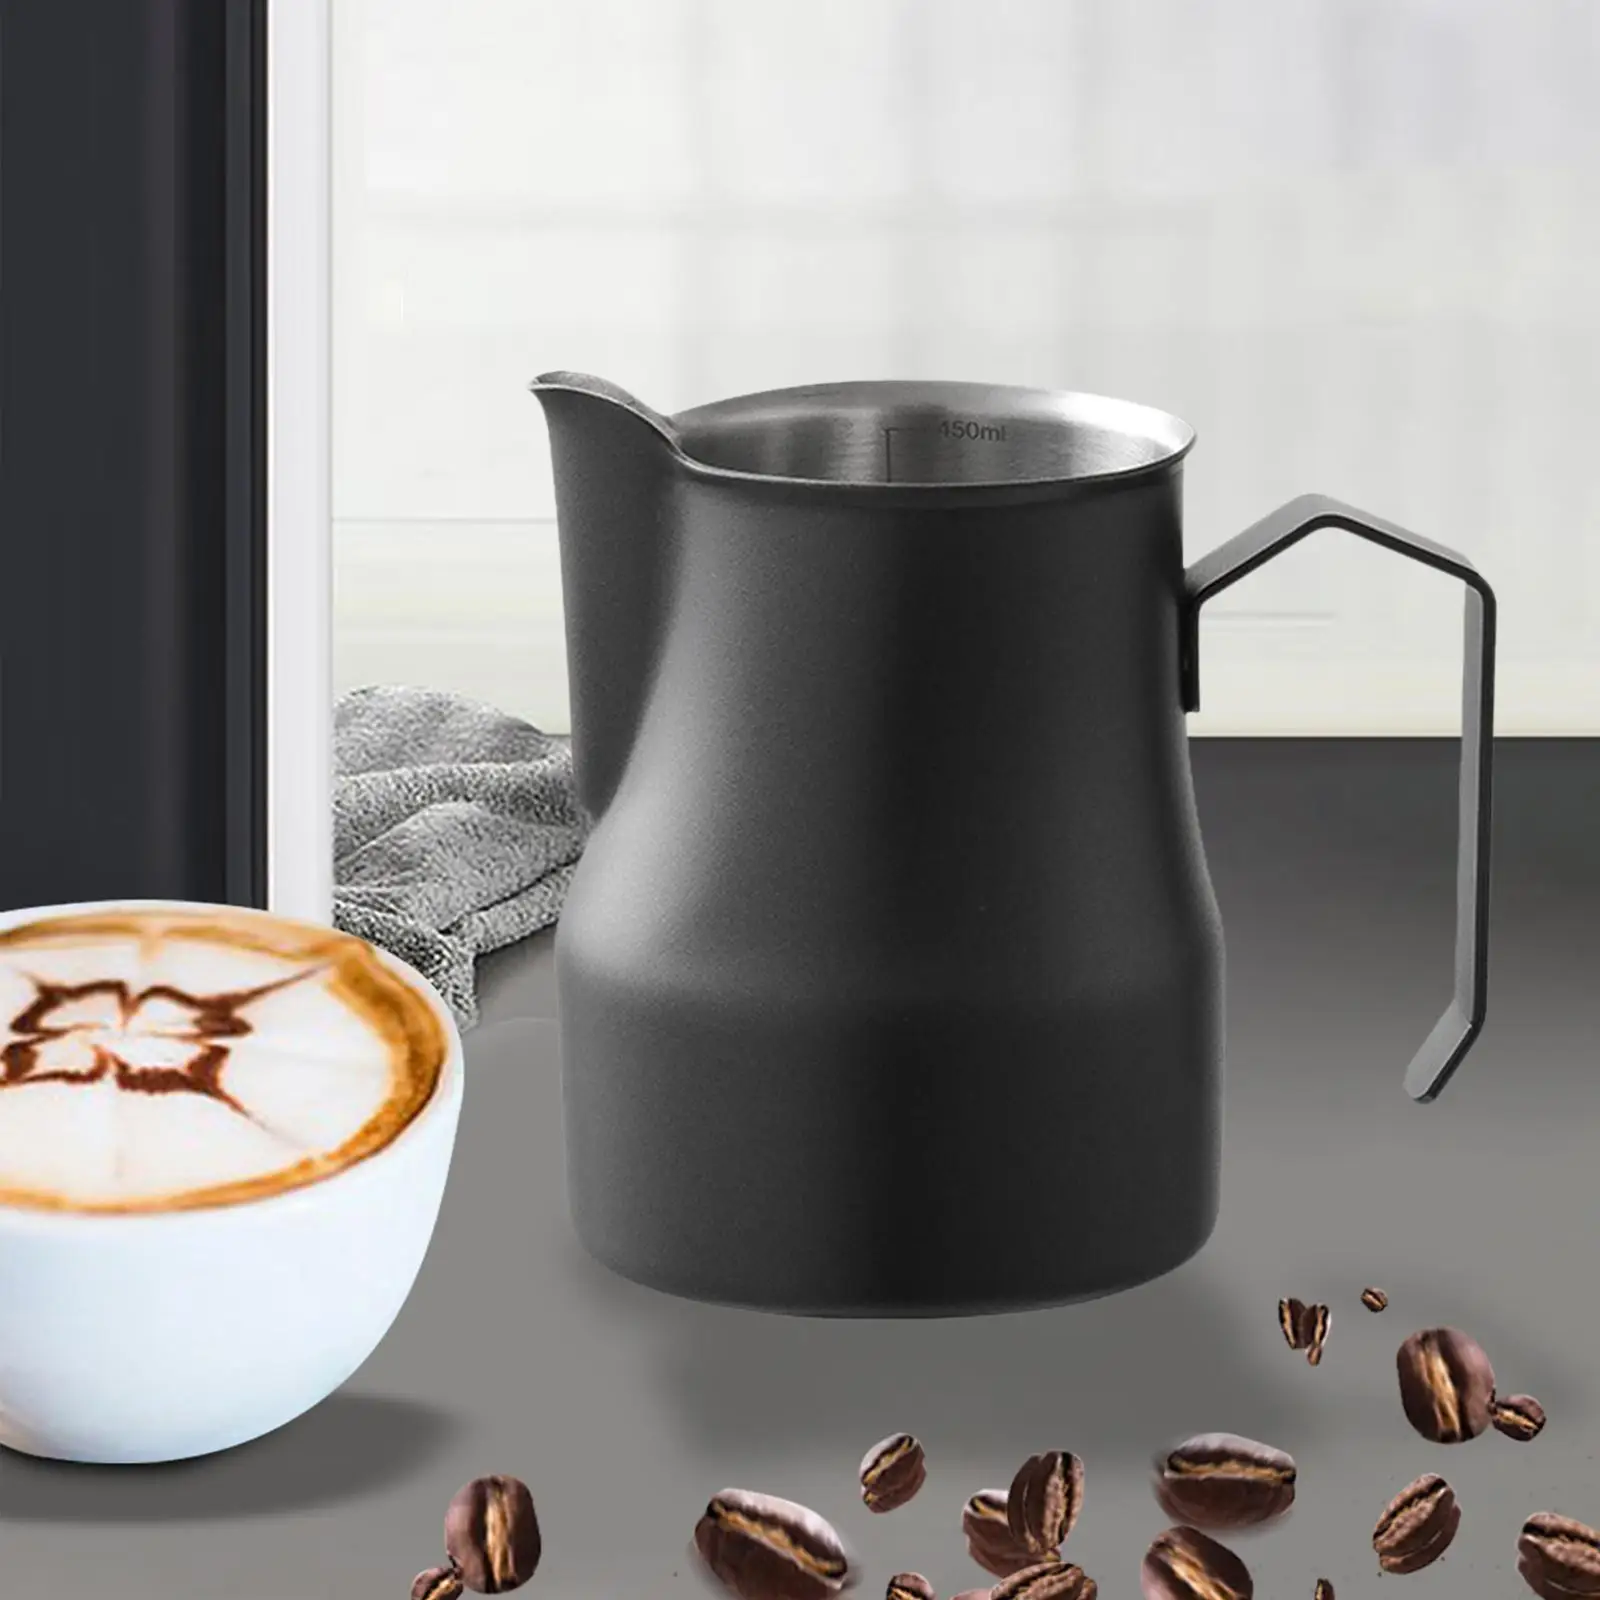 Milk Frothing Pitcher Stainless Steel Espresso Machine Accessories Milk Frother Cup Espresso Steaming Pitcher for Home cafe